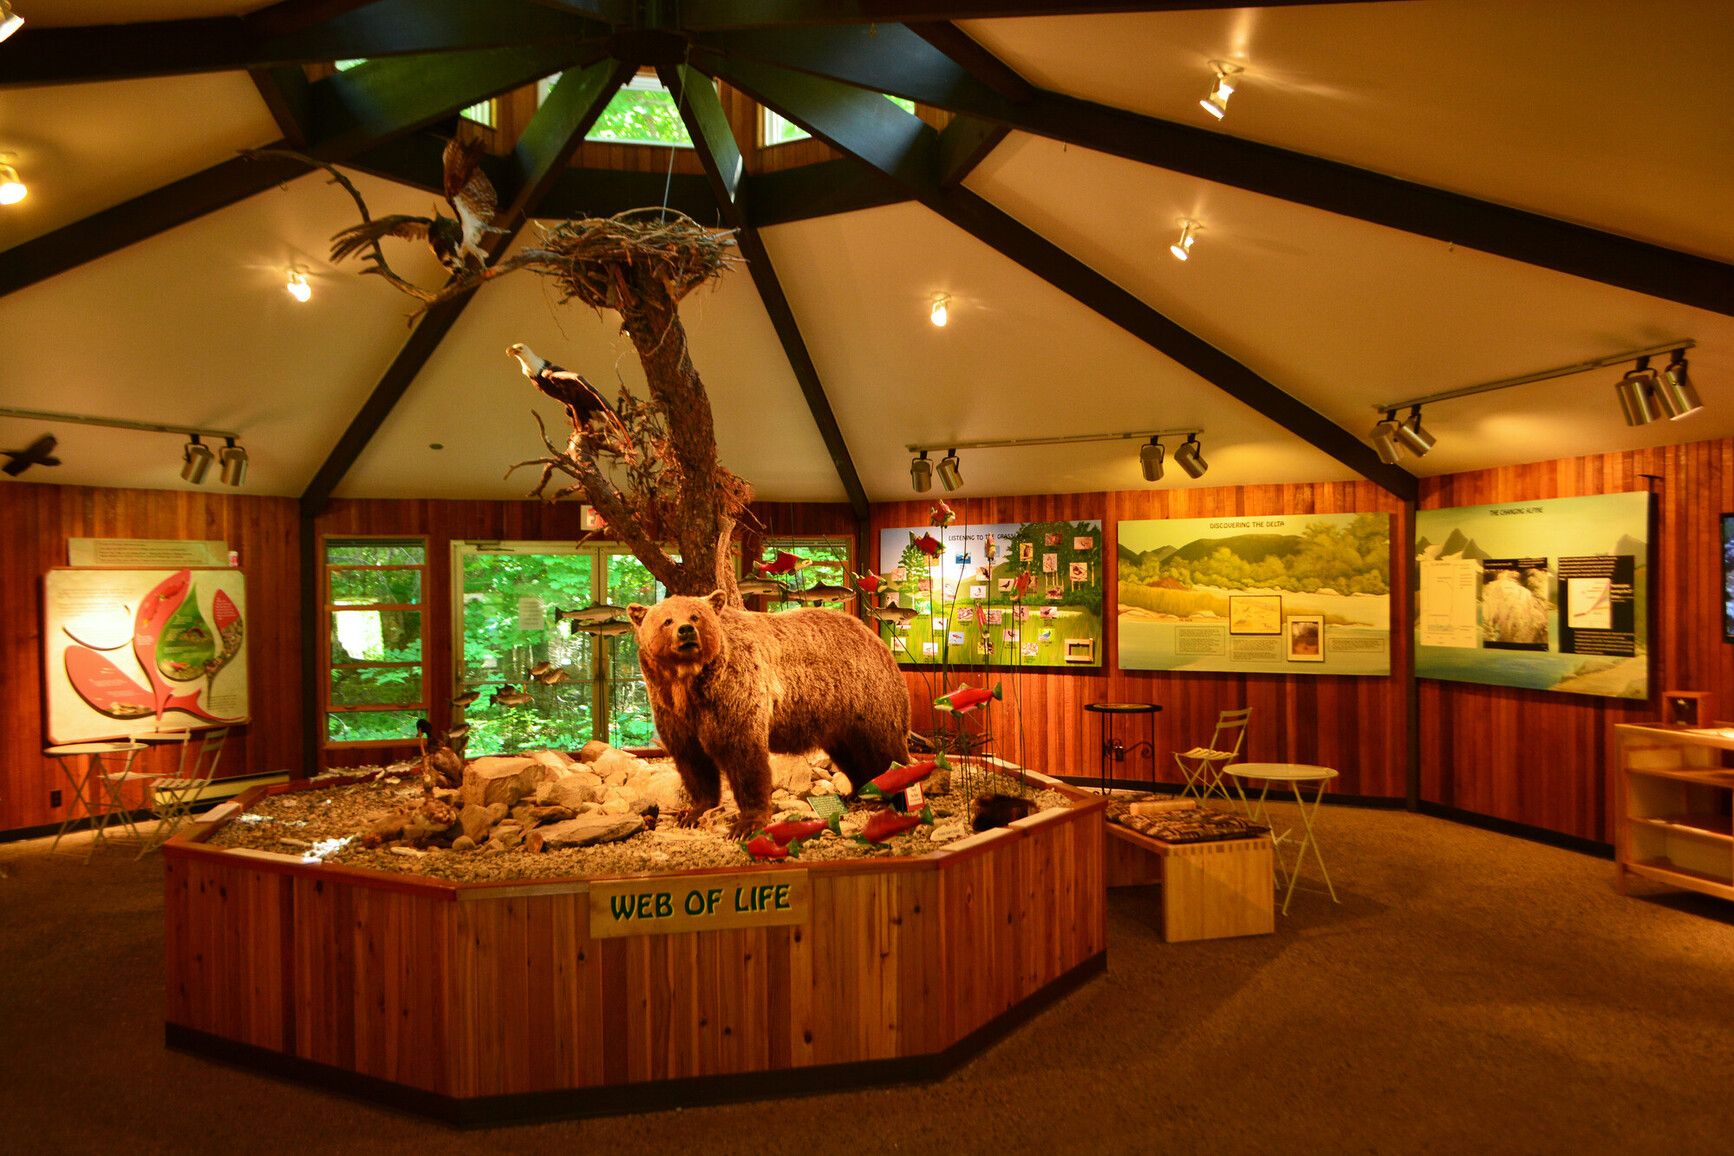 Step into Kokanee Creek Park's visitor center – where nature meets education. Encounter a majestic taxidermized bear alongside captivating infographics, immersing yourself in the wonders of wildlife and conservation. Explore, learn, and be inspired.